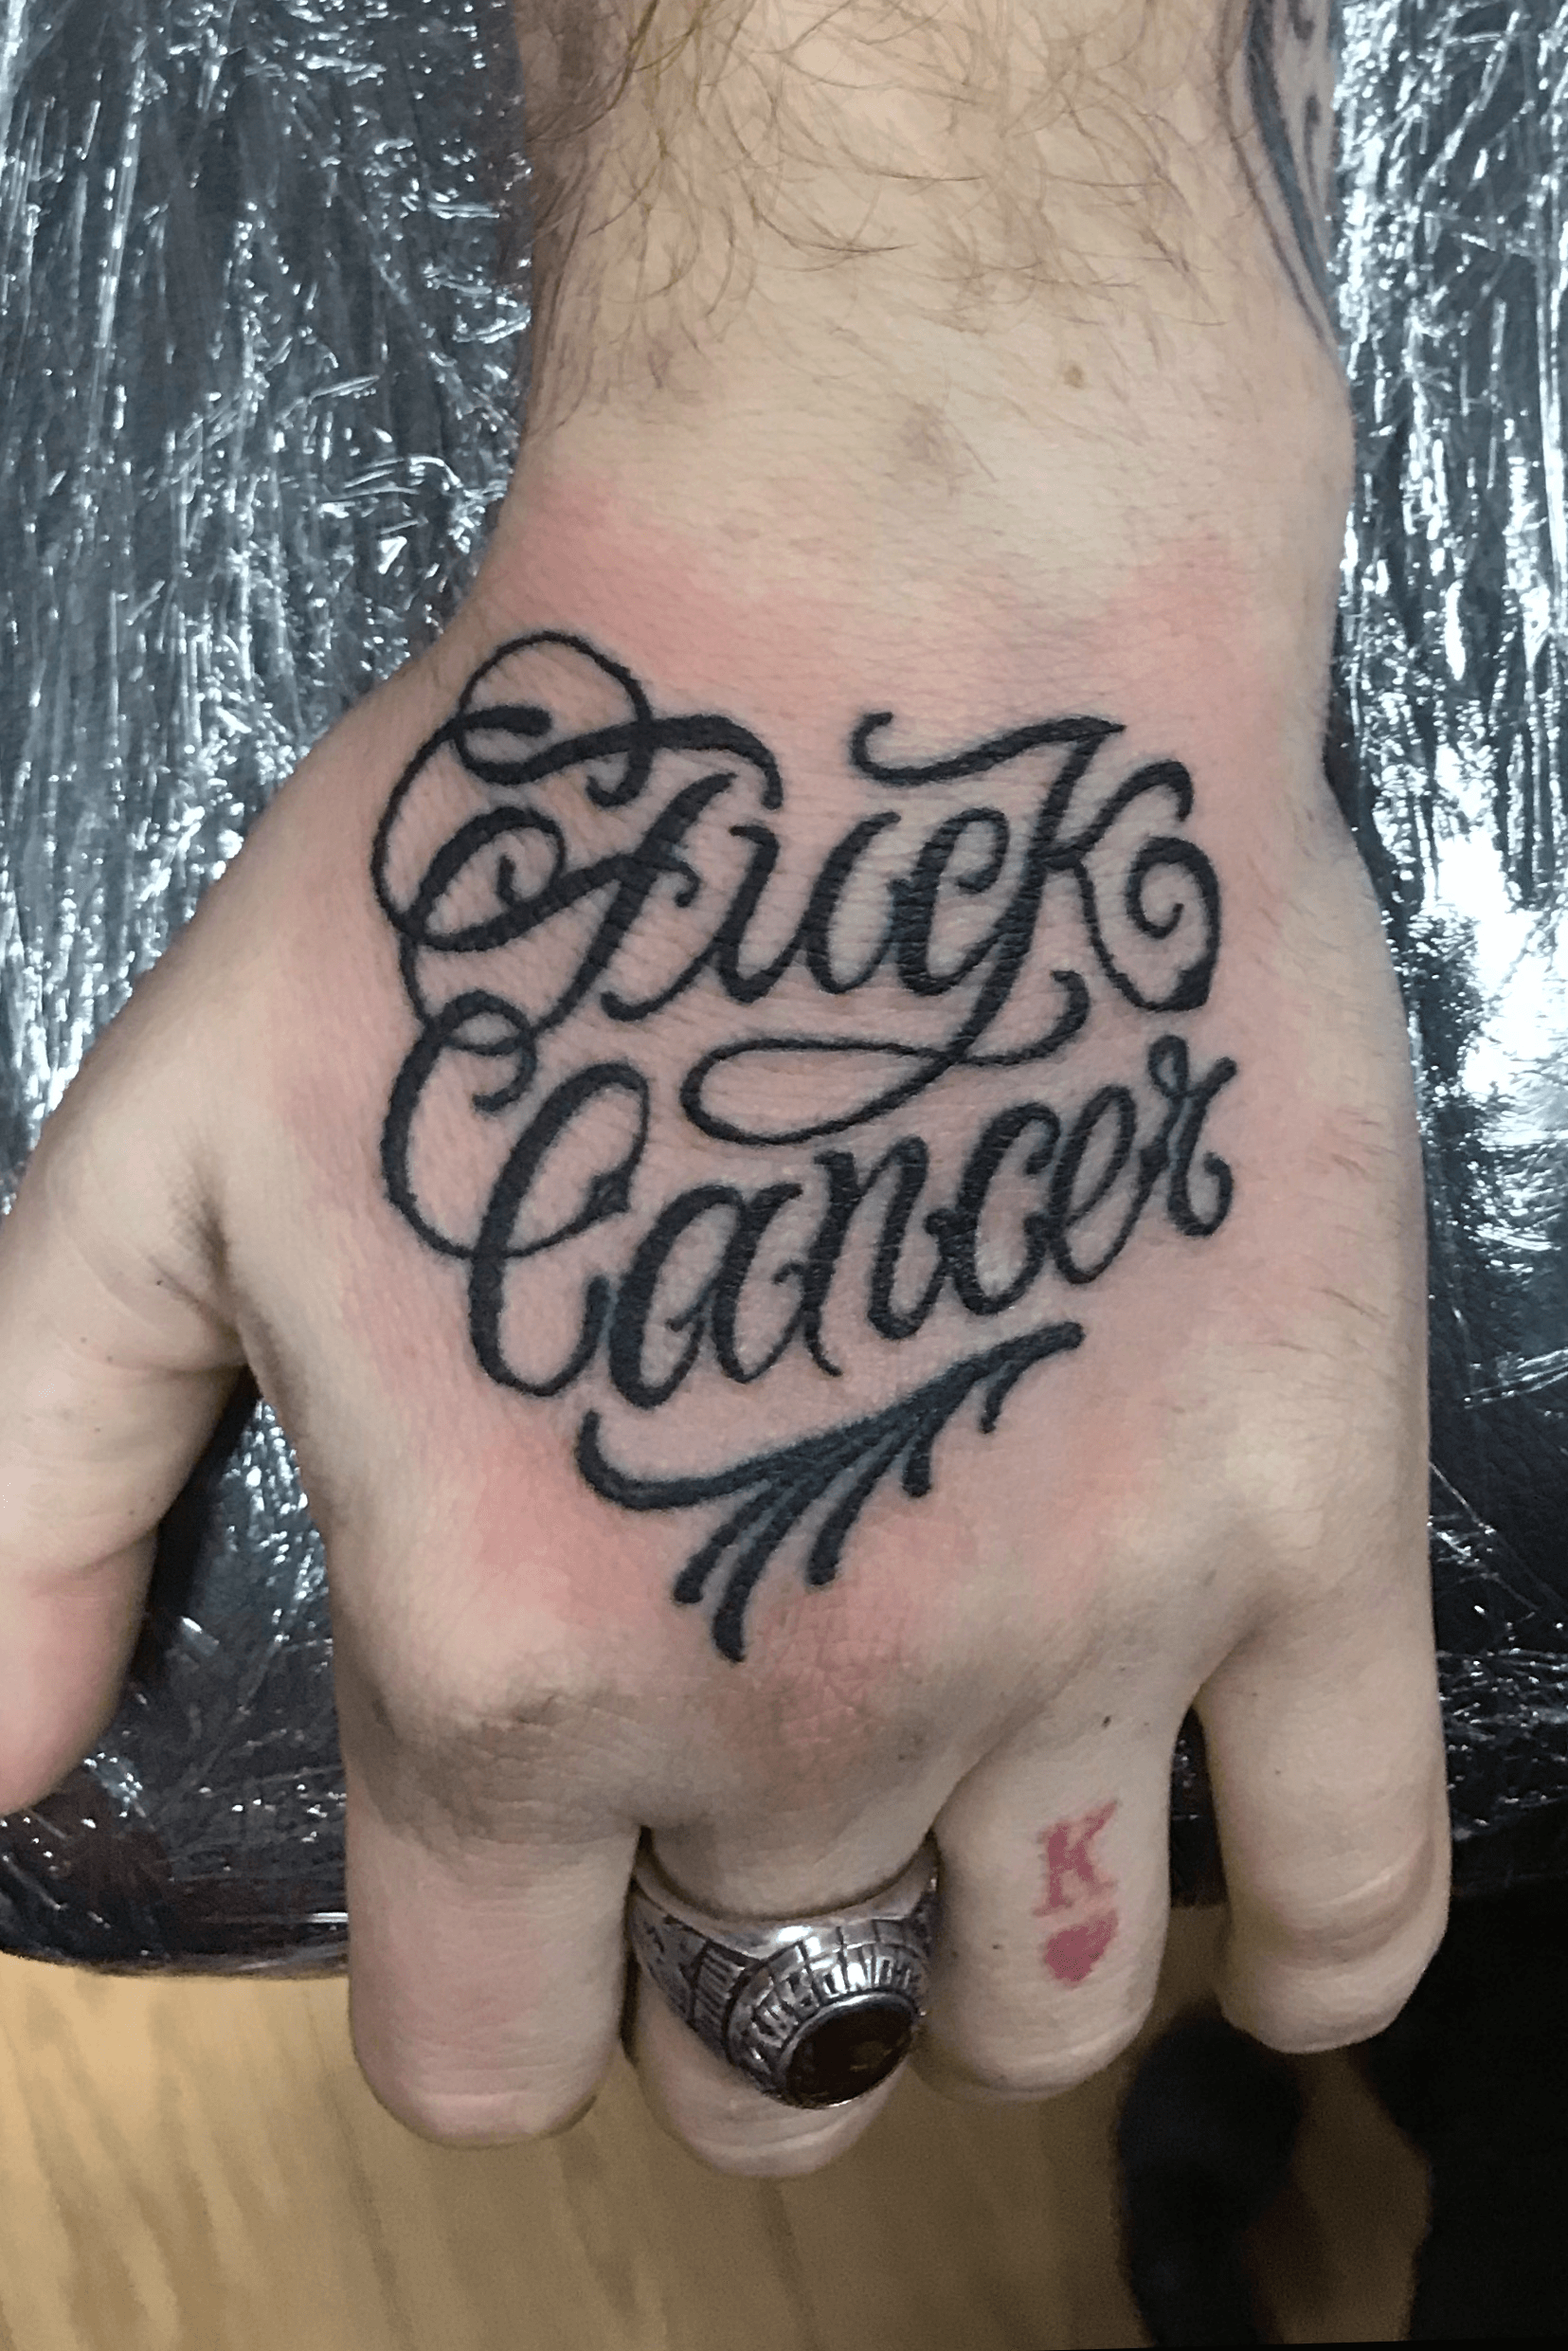 Fuck Cancer on Twitter TattooTuesday wed like to honor those who have  inked their body in honor of FuckCancer Tattoos are a permanent piece of  artwork and we appreciate you all for